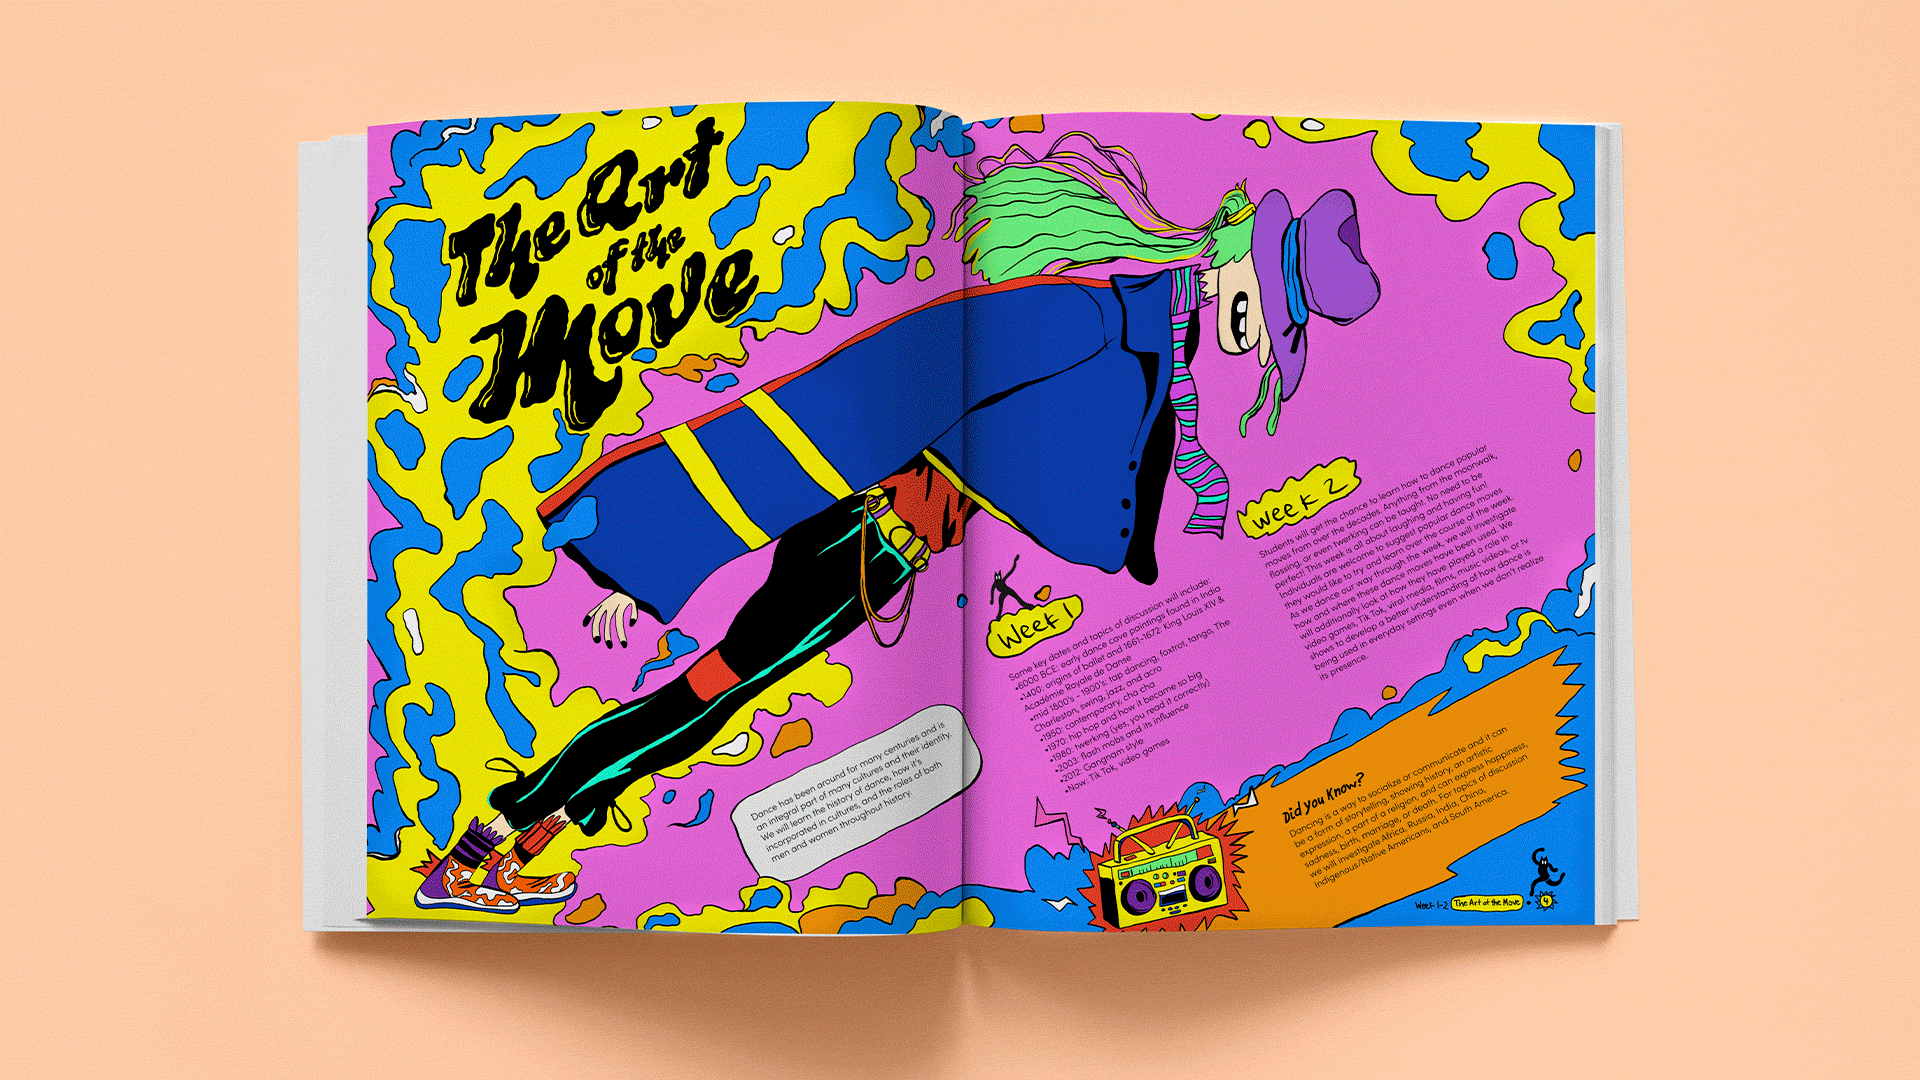 Book spread design, layout, and crazy colorful dance illustrations for various pages in the Groovin’ handbook that focus on addressing the male dancer stigma.